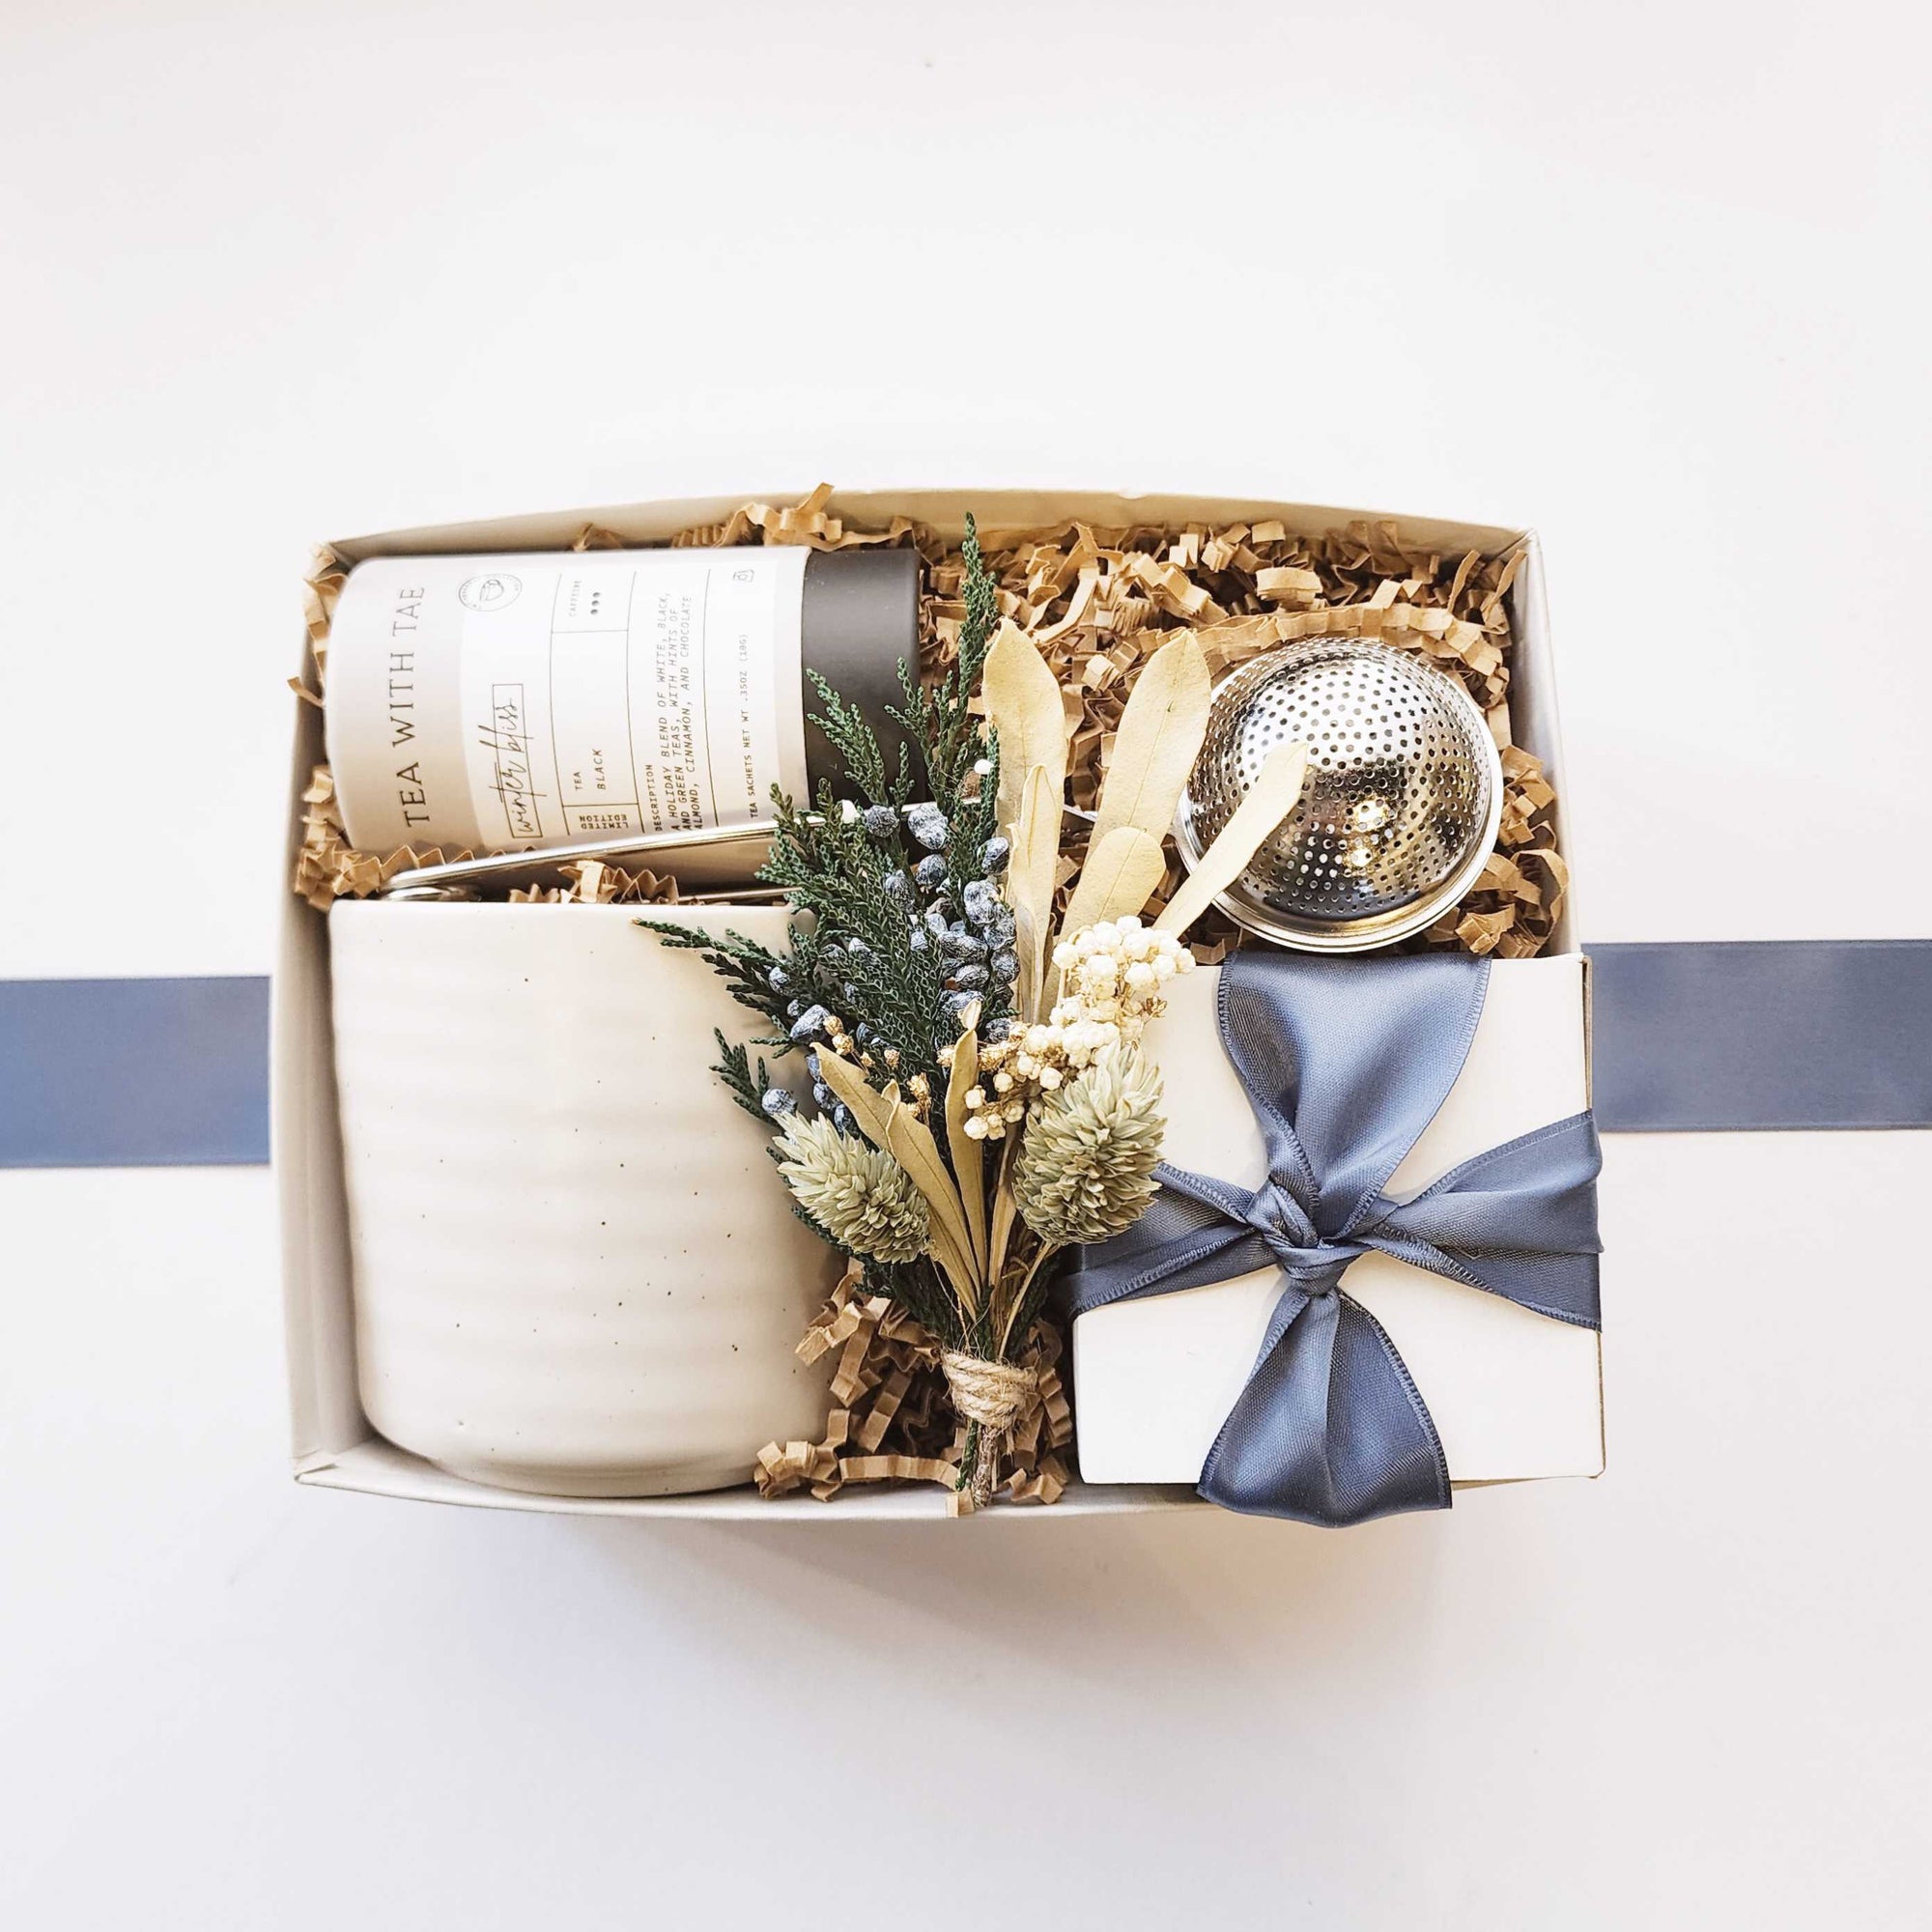 Curated Gift Box  Winter Work From Home - Foxblossom Co.